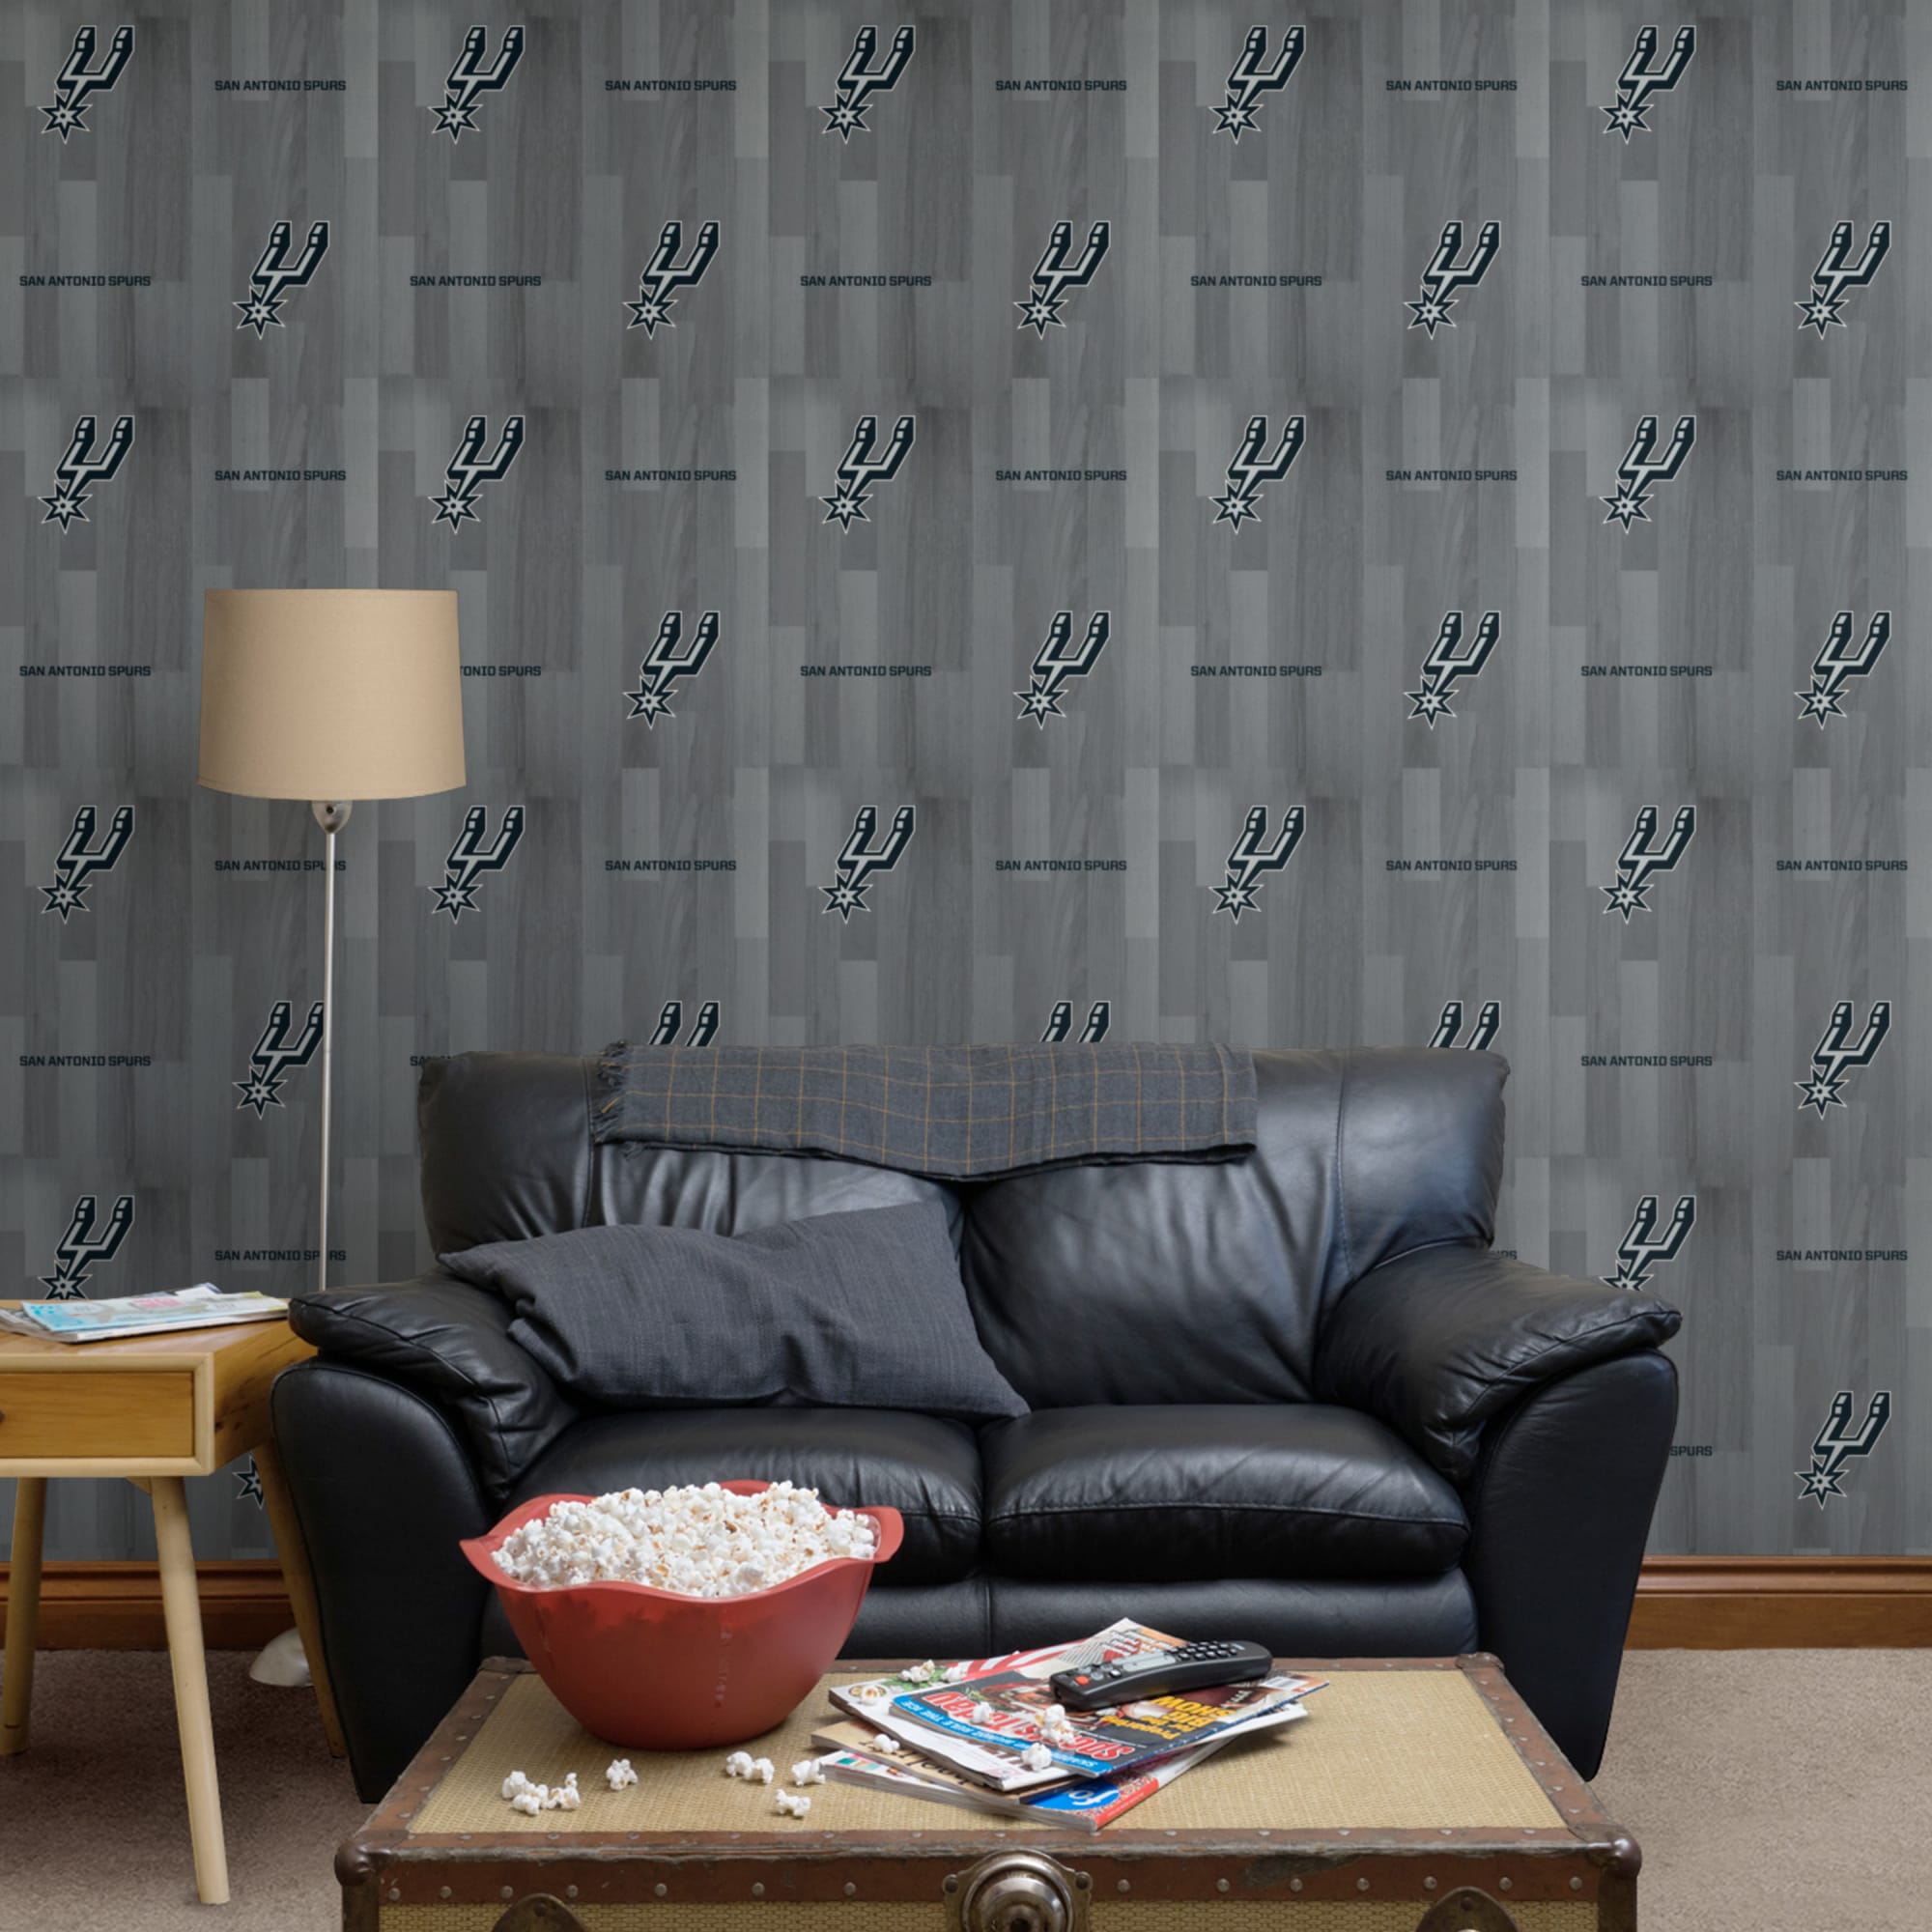 San Antonio Spurs: Hardwood Pattern - Officially Licensed Removable Wallpaper 12" x 12" Sample by Fathead